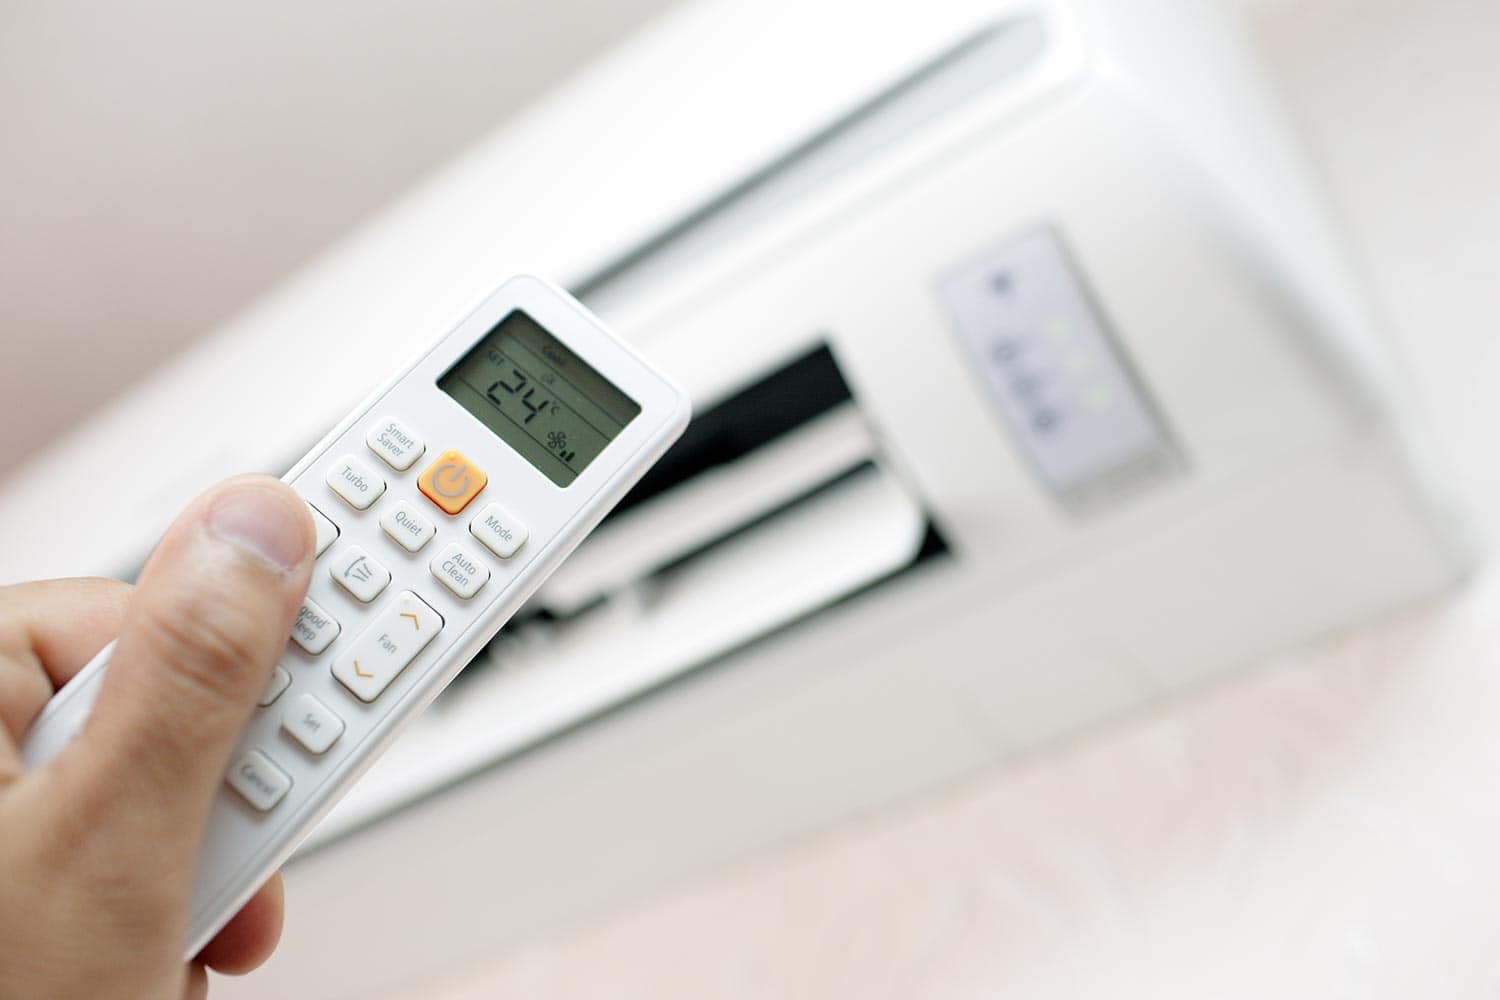 How can I save my AC electricity bill?Which AC is best for power saving?
What is the bill of AC for 1 hour?
How do I set my AC to save electricity?
